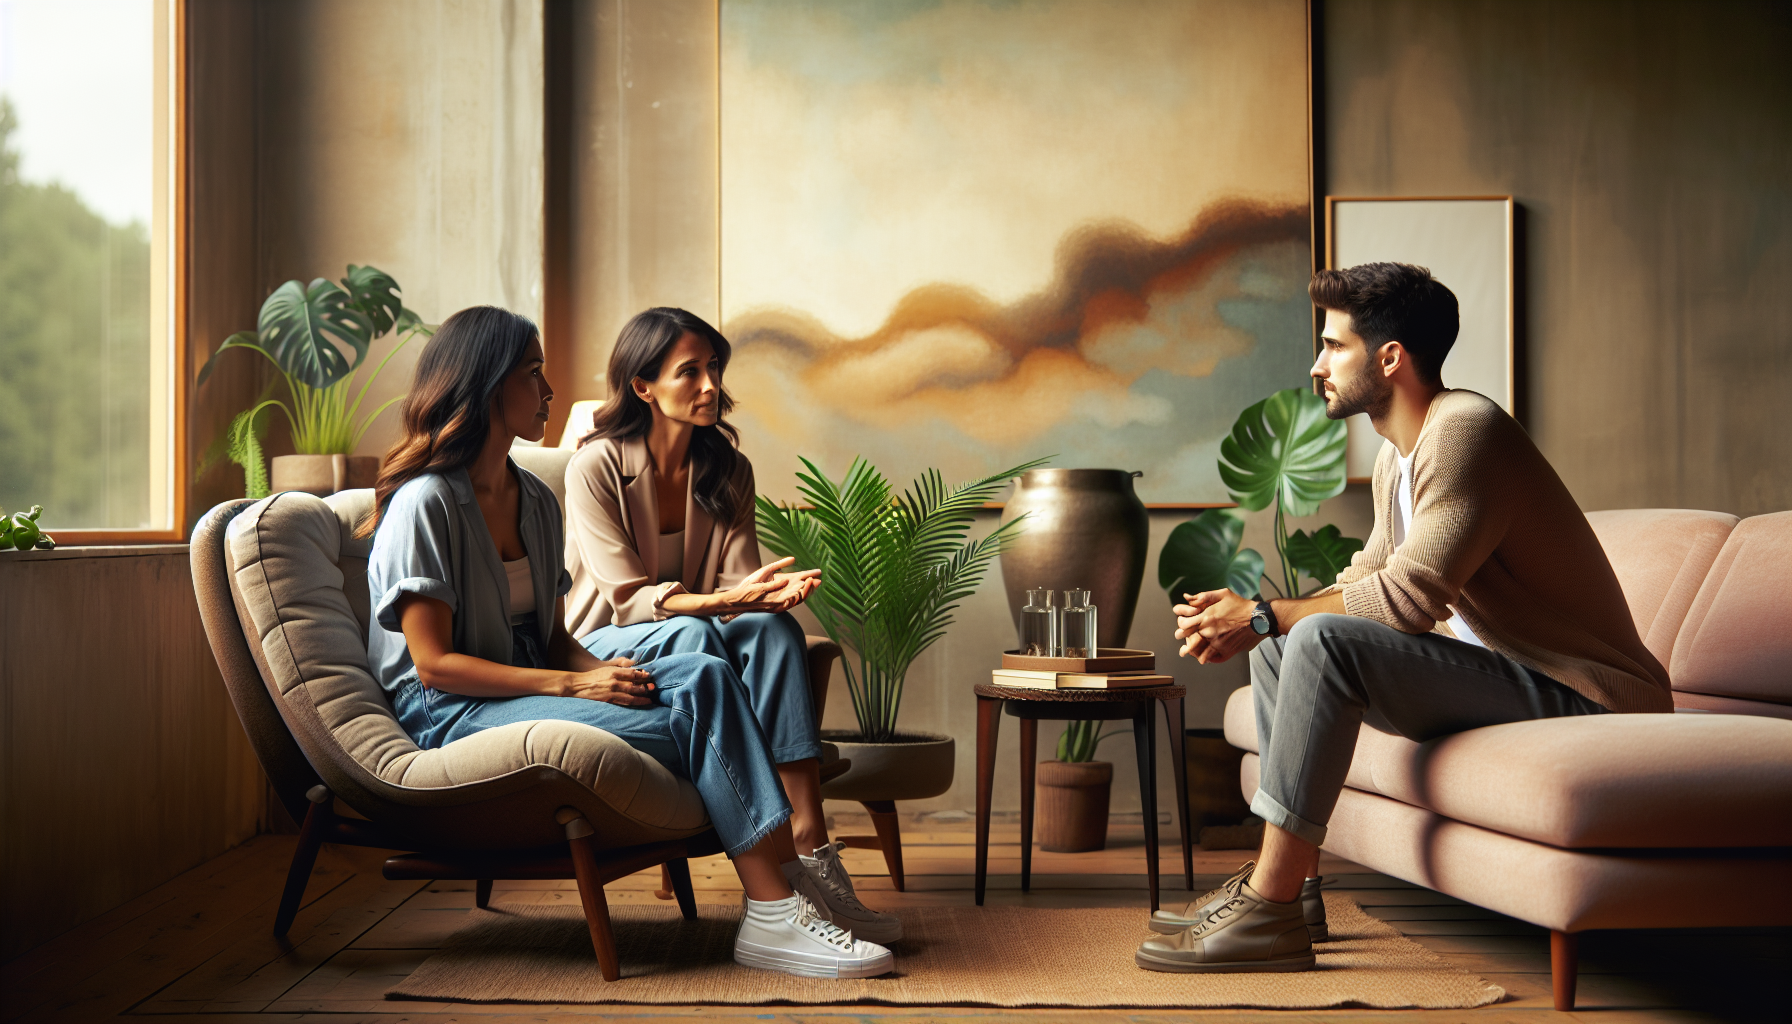 Illustration of a therapist guiding a couple in a counseling session, representing techniques and interventions in emotionally focused therapy